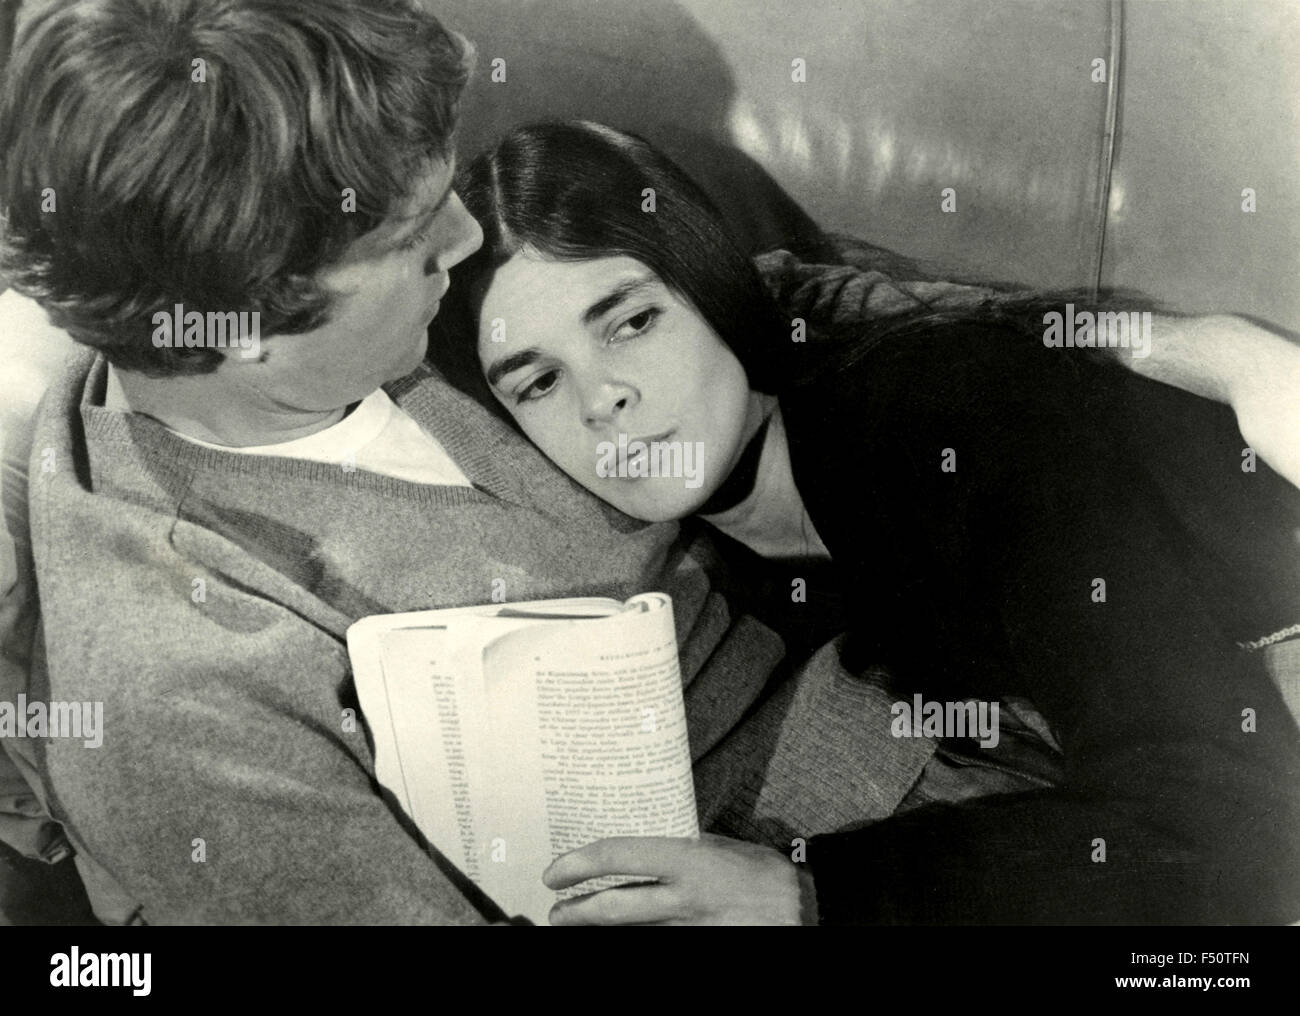 The actors Eli MacGraw and Ryan O'Neal in a scene from the movie 'Love Story', USA Stock Photo